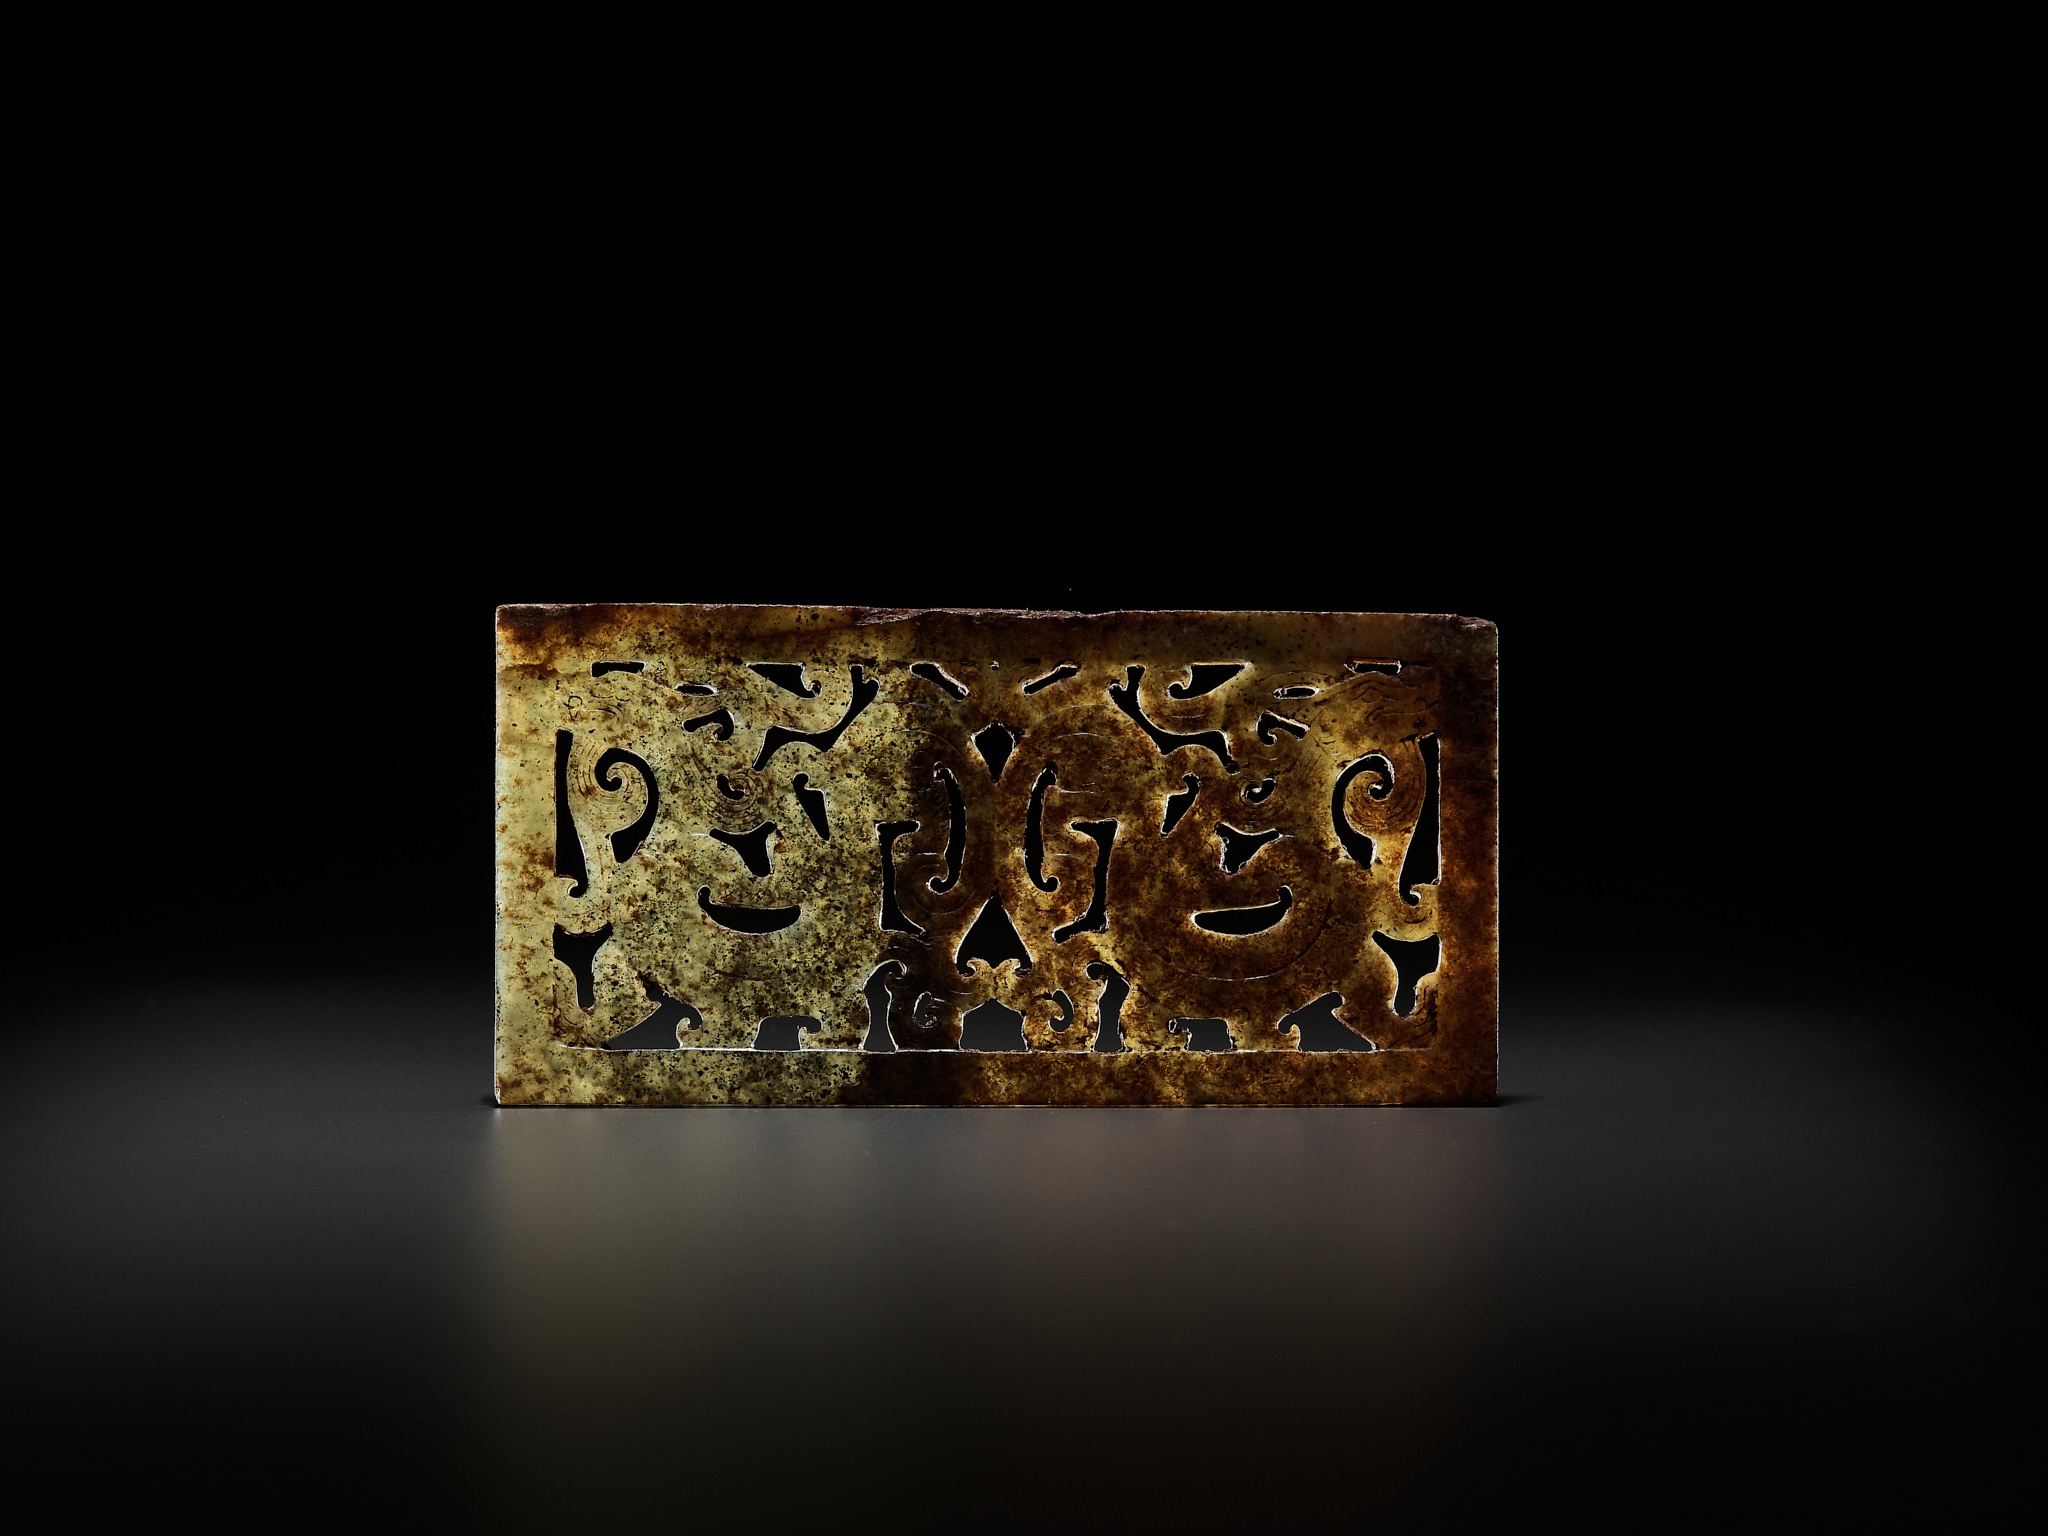 A RECTANGULAR GREEN JADE 'DOUBLE DRAGON' PLAQUE, LATE WARRING STATES PERIOD TO EARLY WESTERN HAN DYN - Image 6 of 12